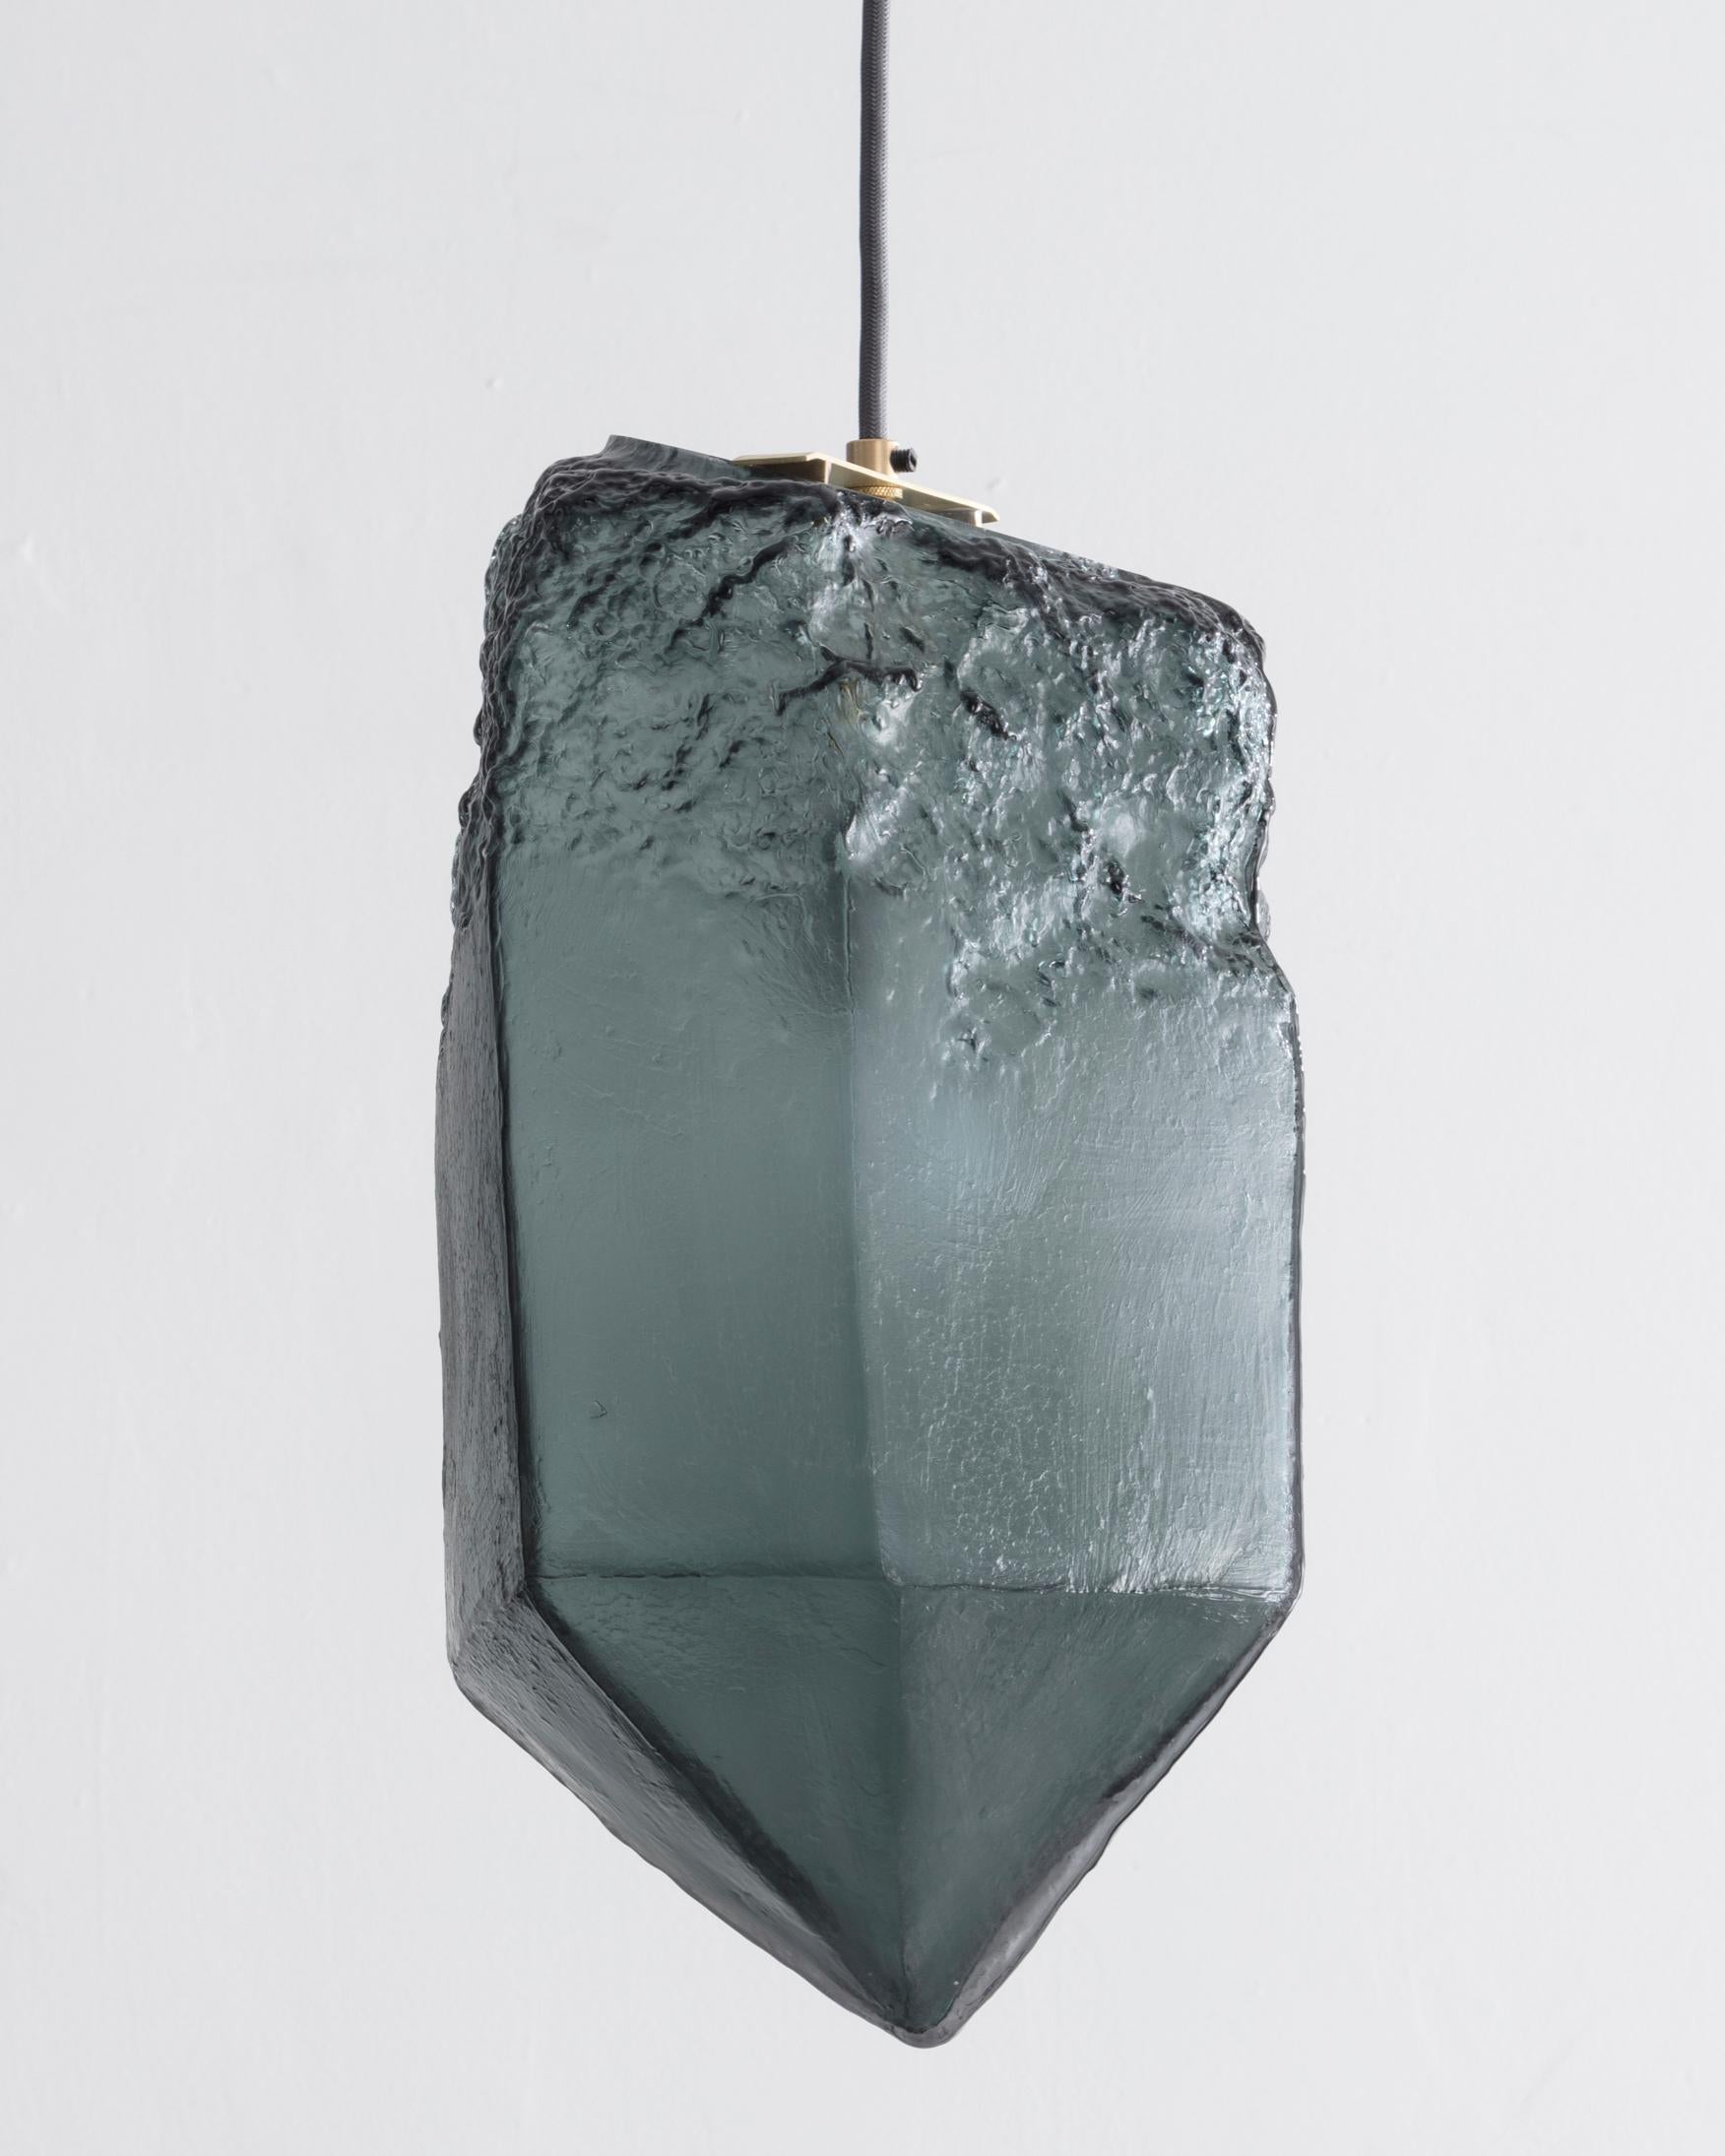 Crystal illuminated sculptural pendant in hand blown dark gray glass. Designed and made by Jeff Zimmerman, USA, 2017.
 